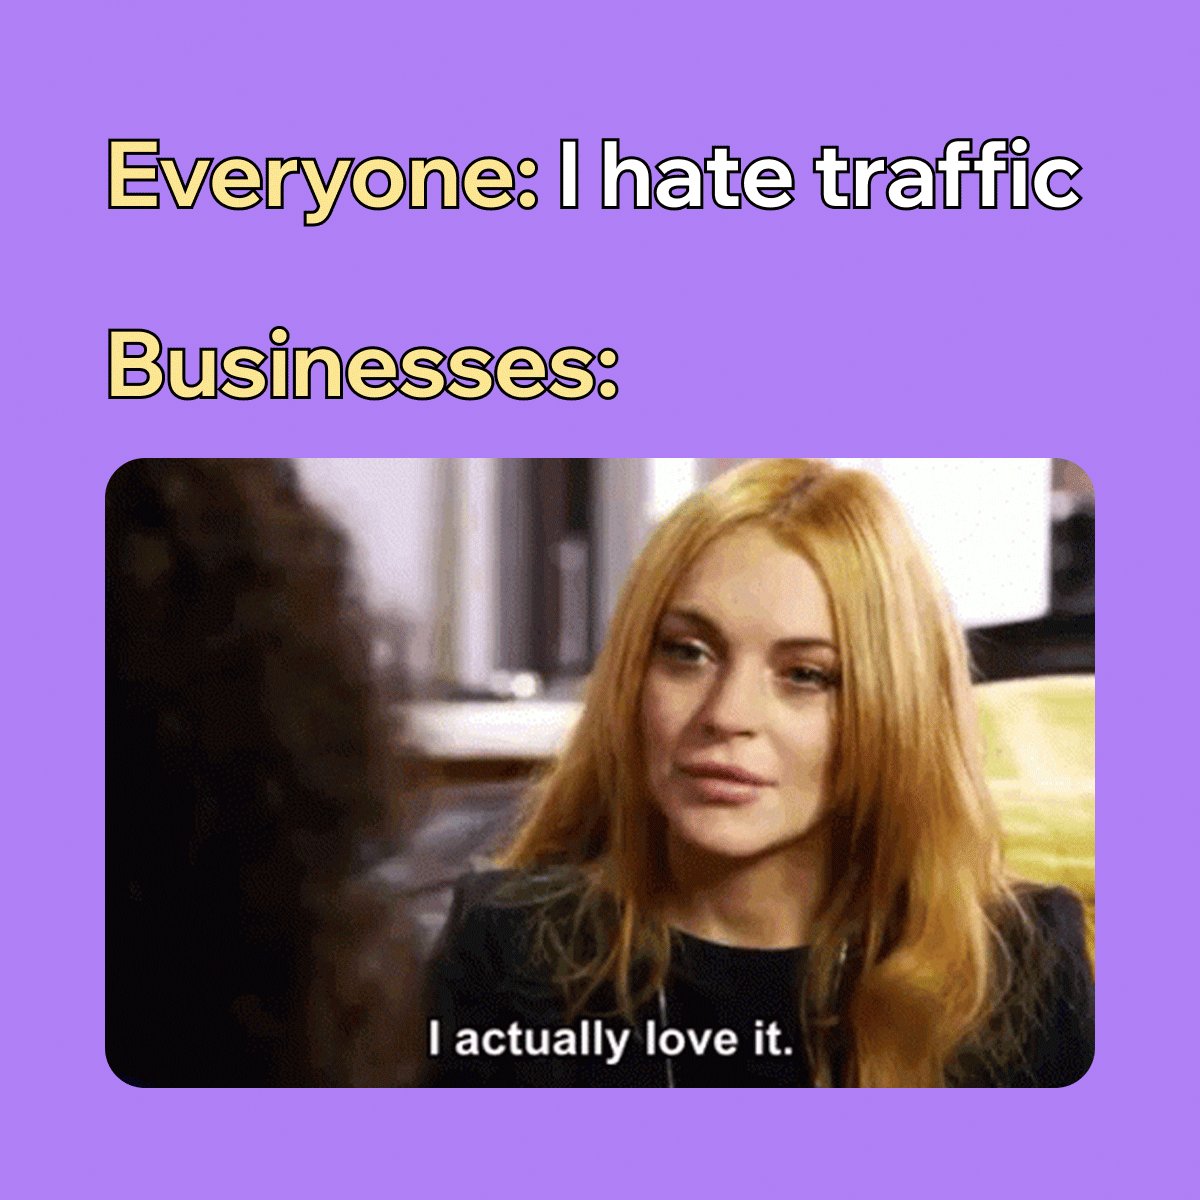 Text on a purple background reads: 

Everyone: I hate traffic 

Businesses: 

Below the word businesses is a video of Lindsay Lohan from an interview with Oprah Winfrey saying "I actually love it."